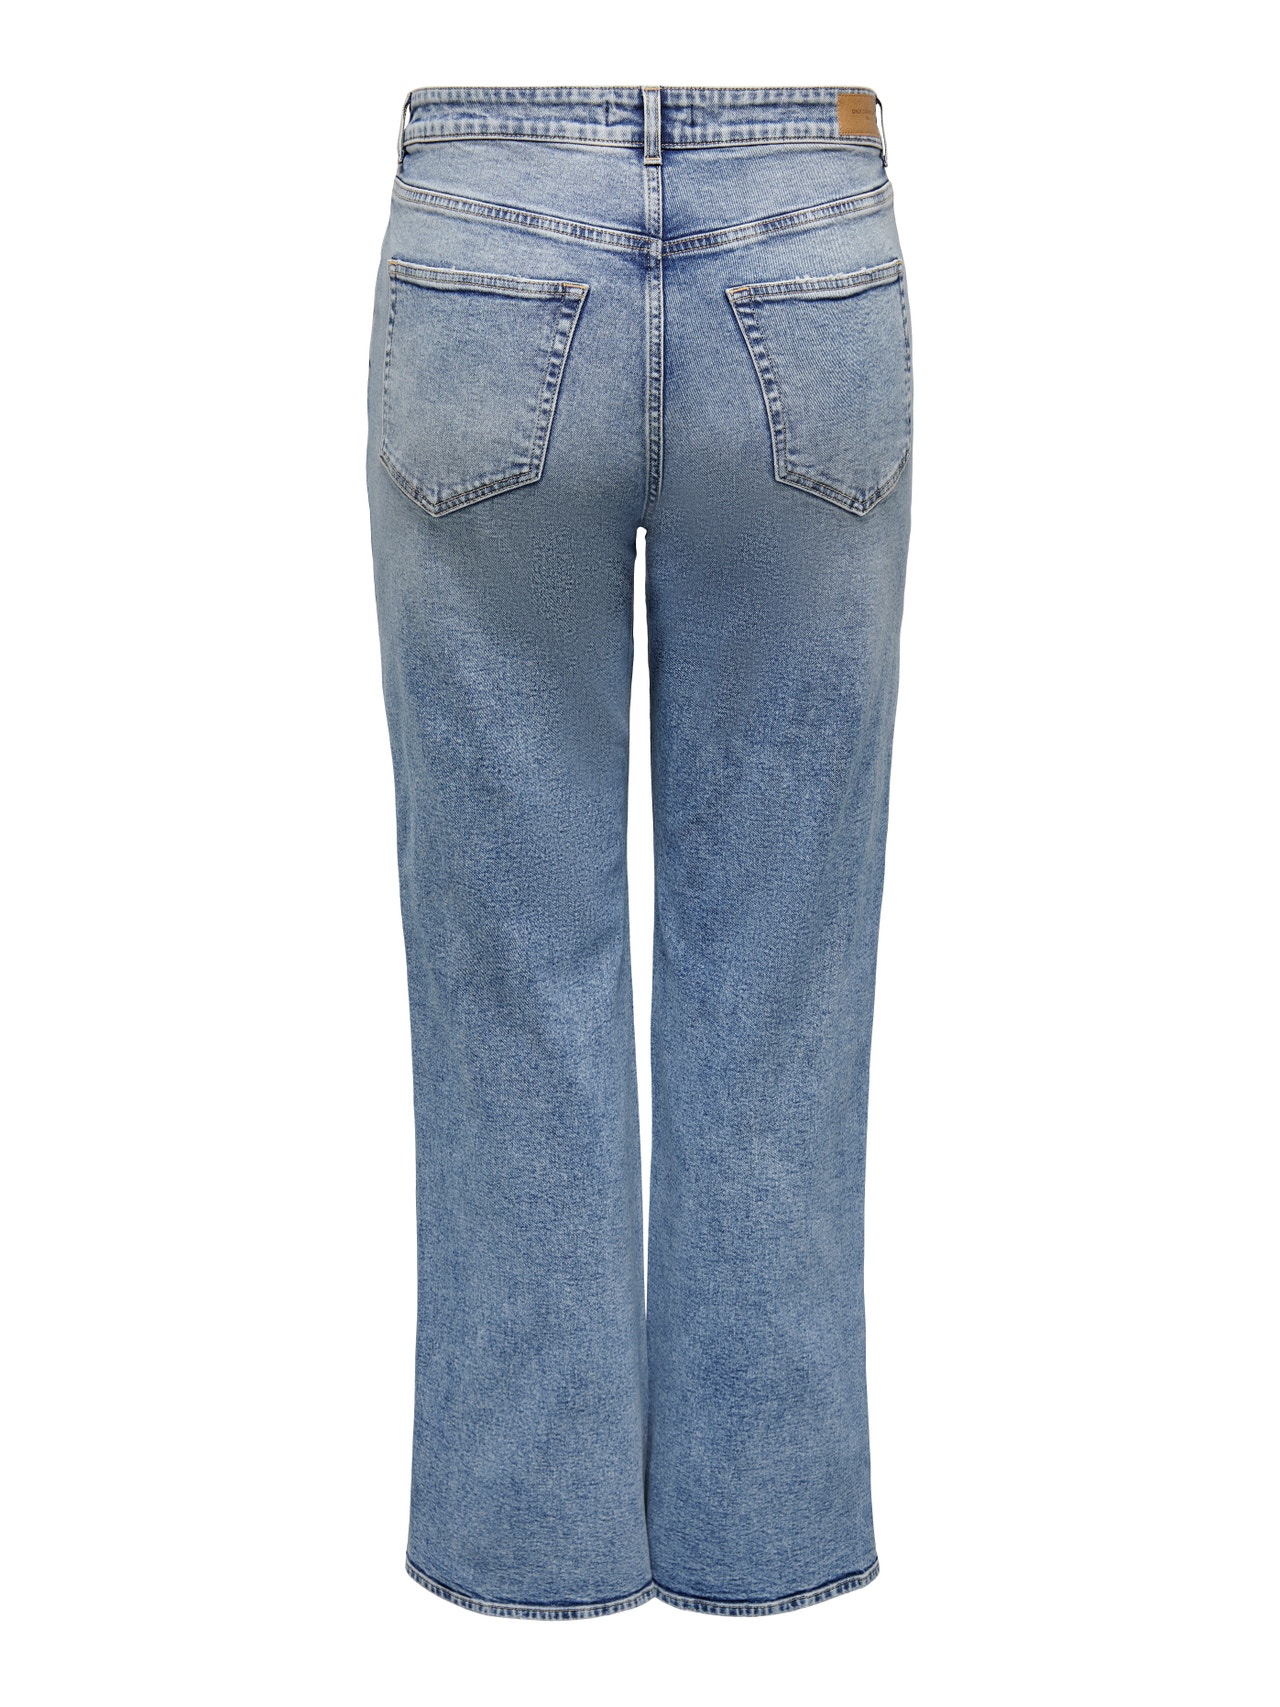 ONLY Jeans Skinny Fit Taille haute -Light Blue Denim - 15287280